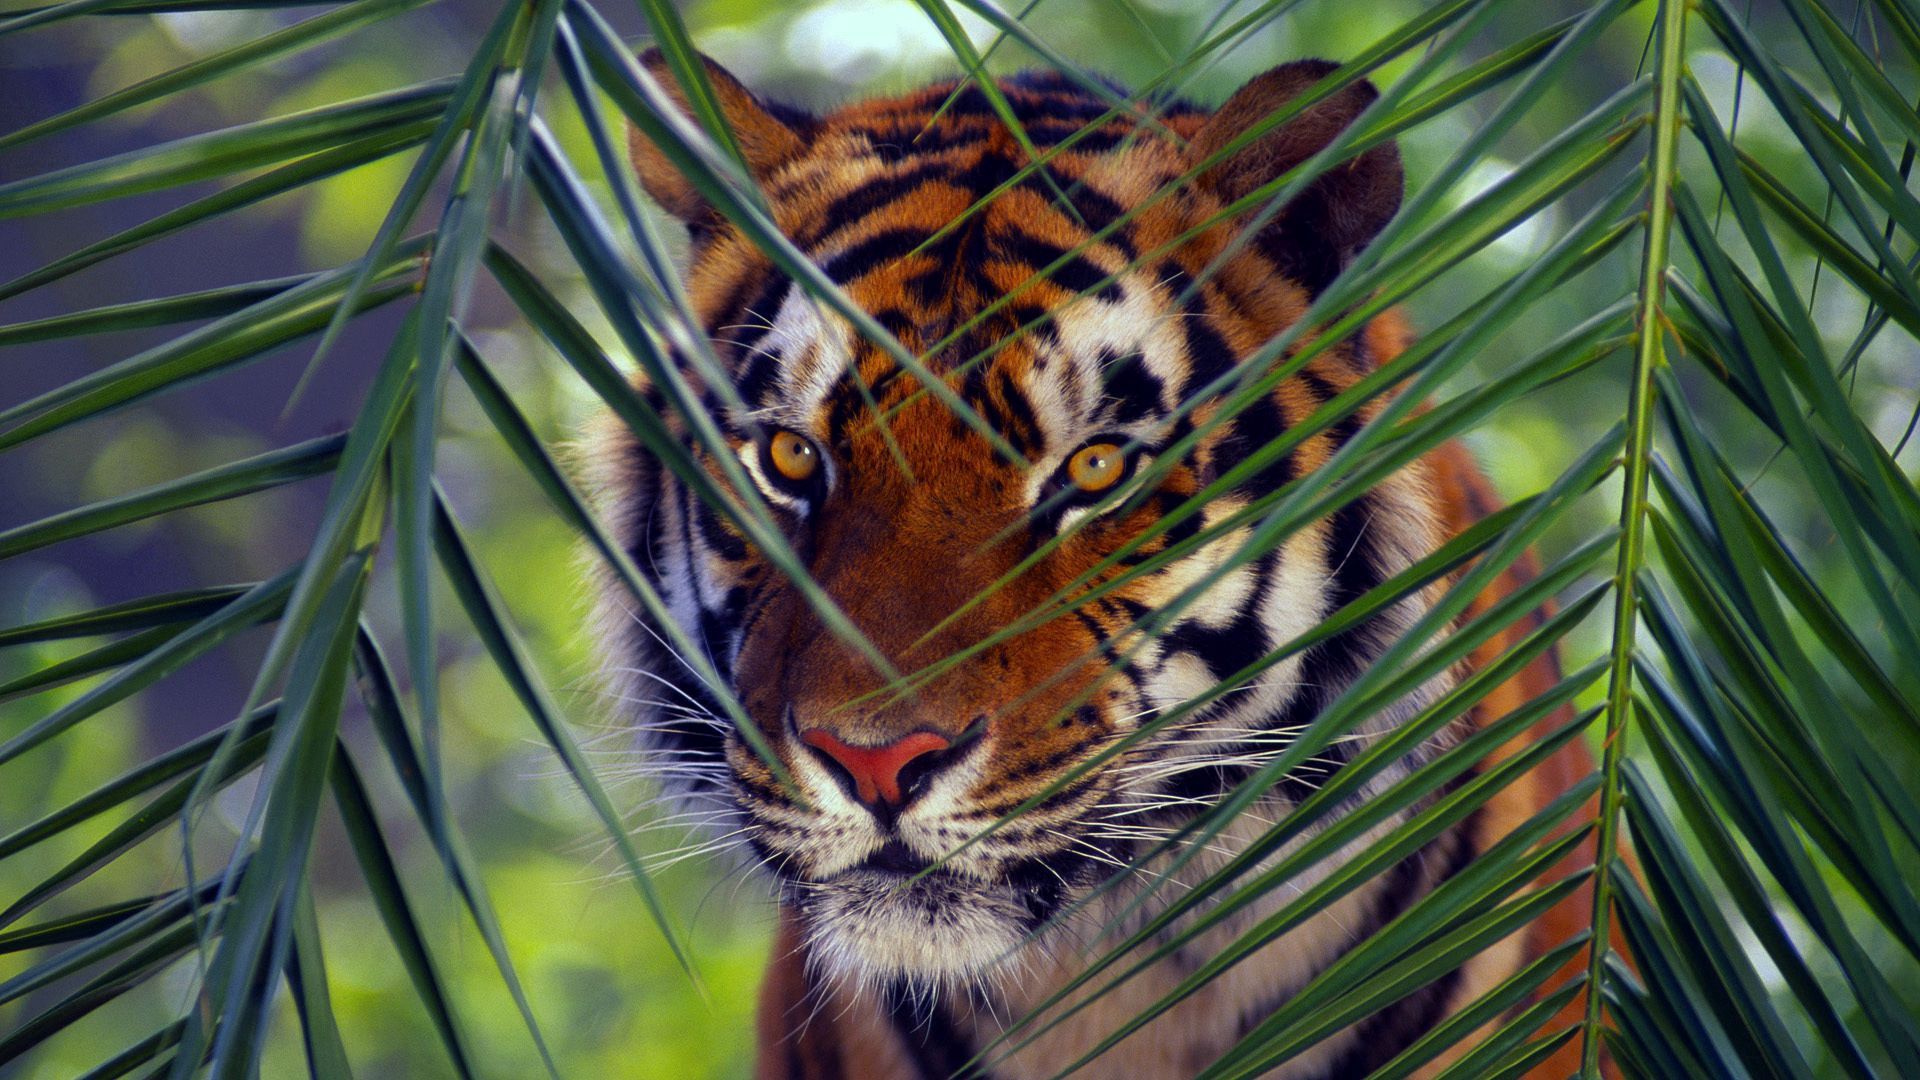 62395 download wallpaper leaves, animals, muzzle, striped, sight, opinion, tiger screensavers and pictures for free